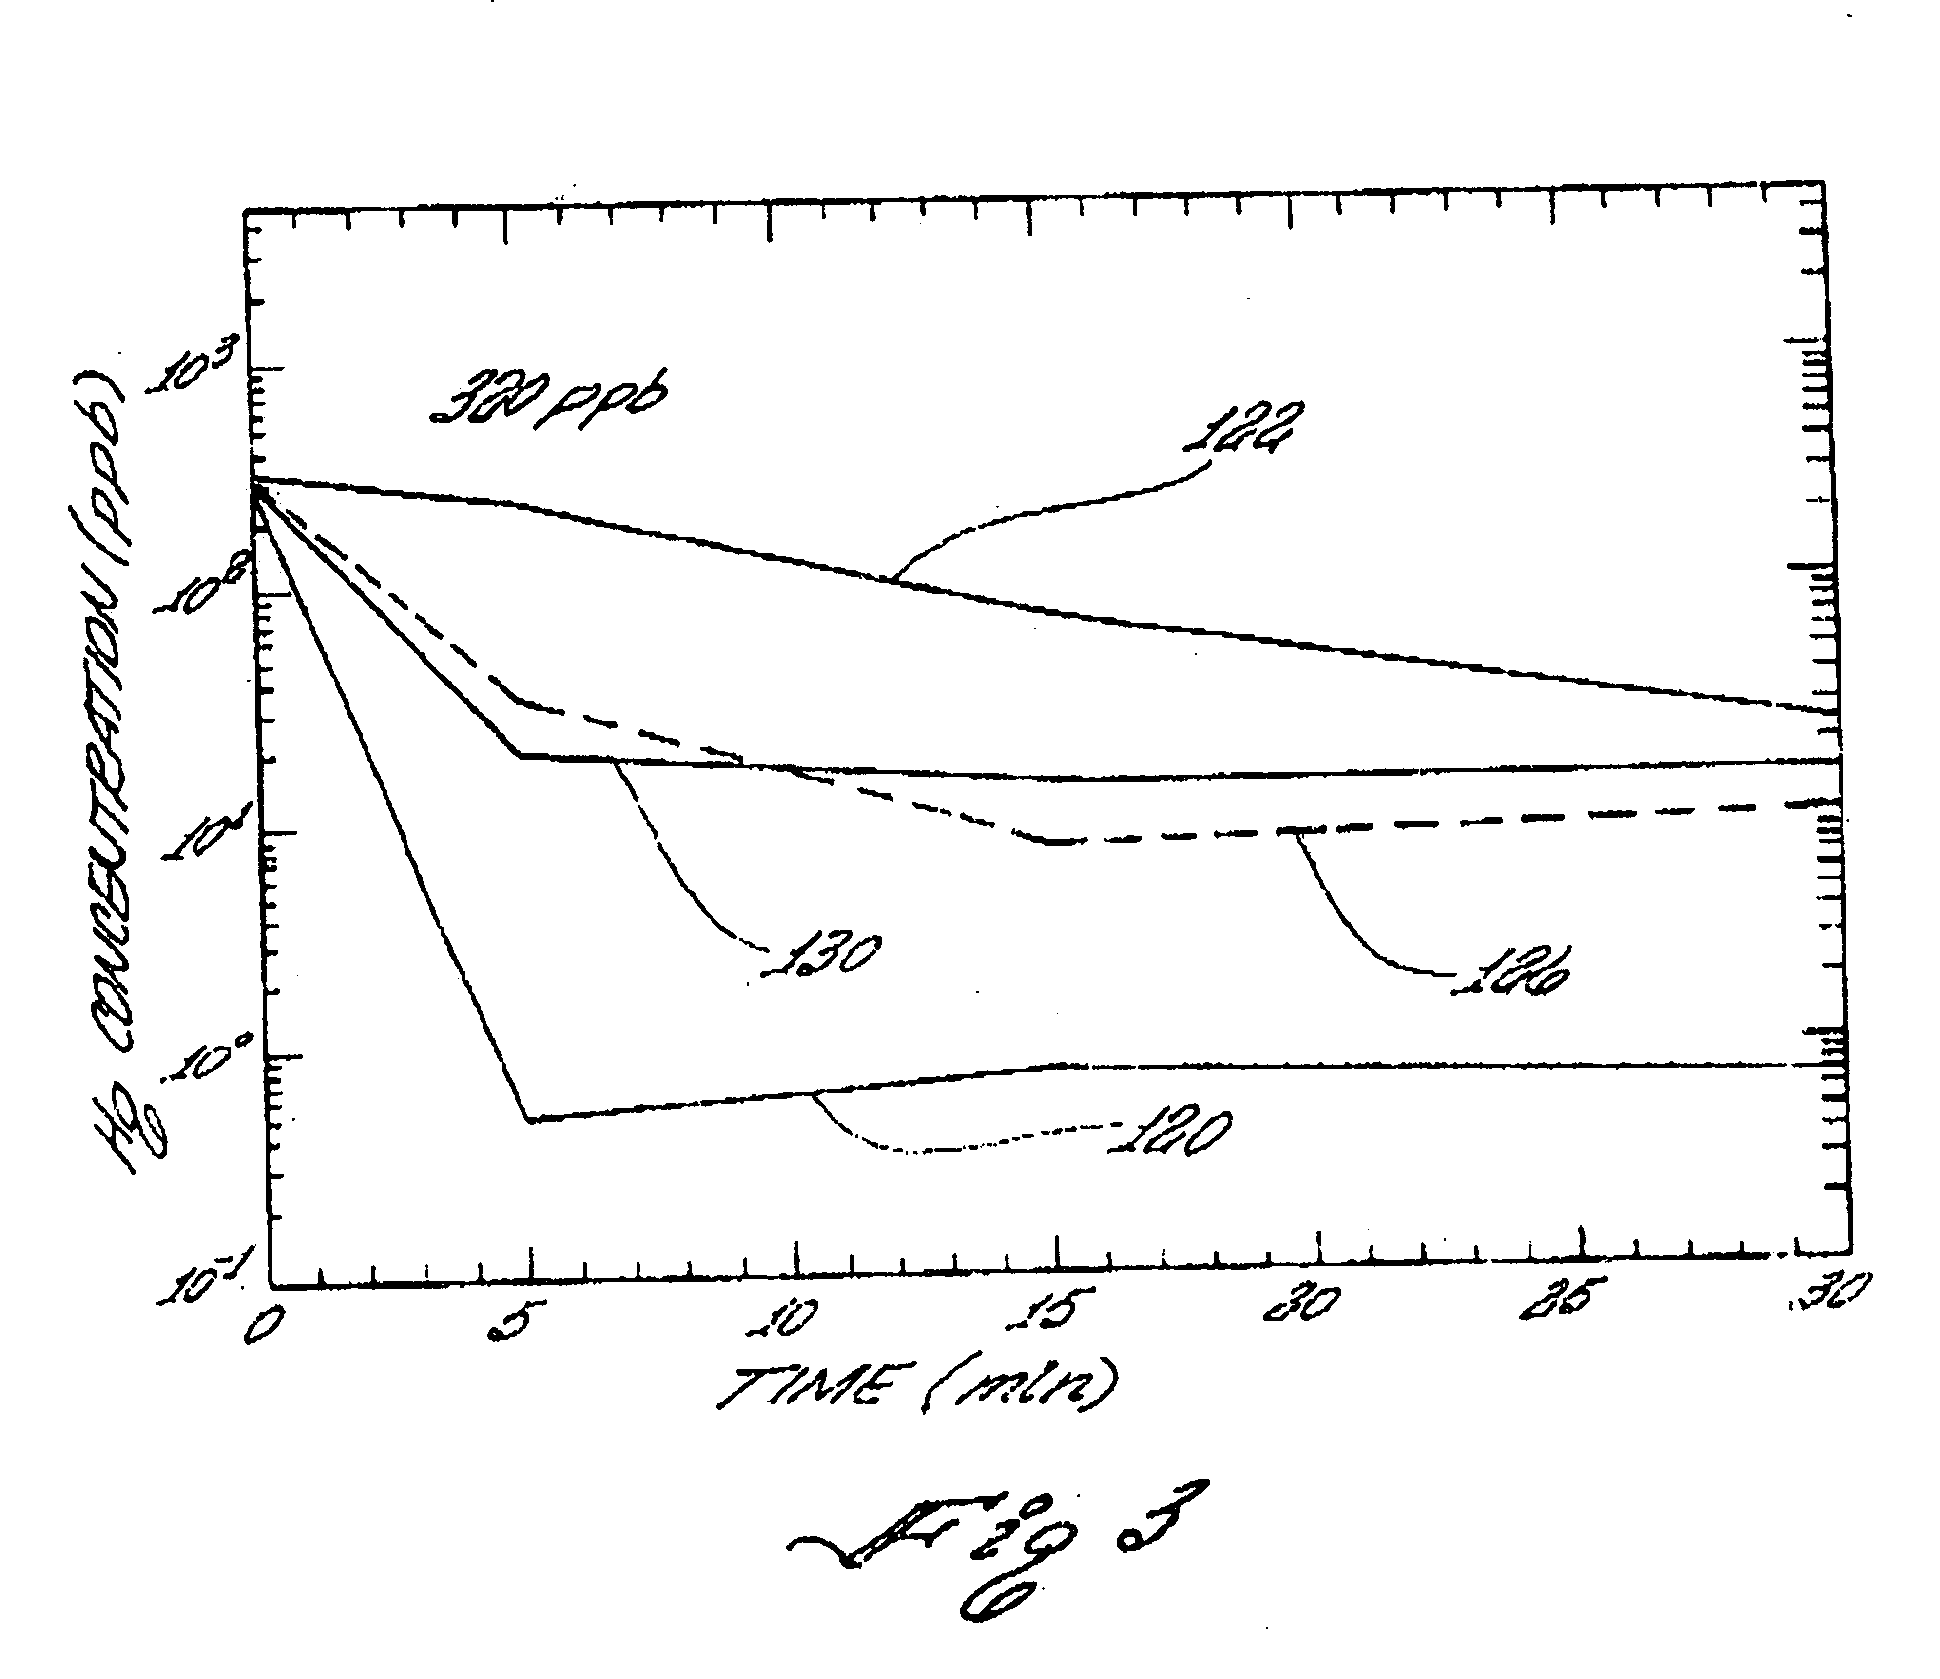 Mercury adsorbent composition, process of making same and method of separating mercury from fluids